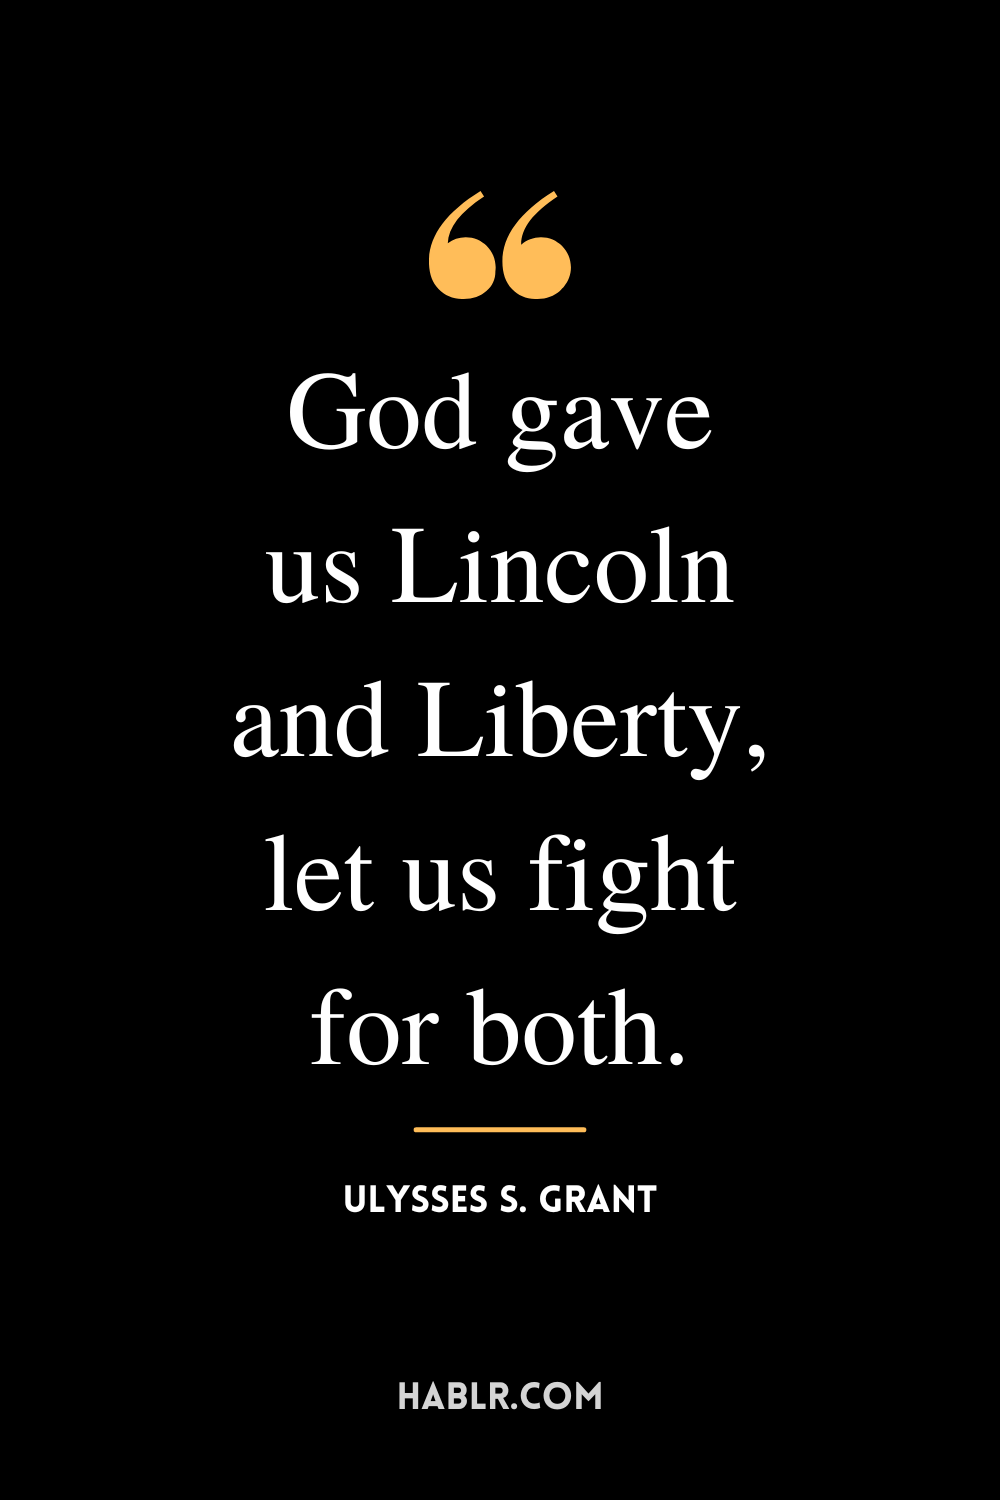 “God gave us Lincoln and Liberty, let us fight for both.” -Ulysses S. Grant